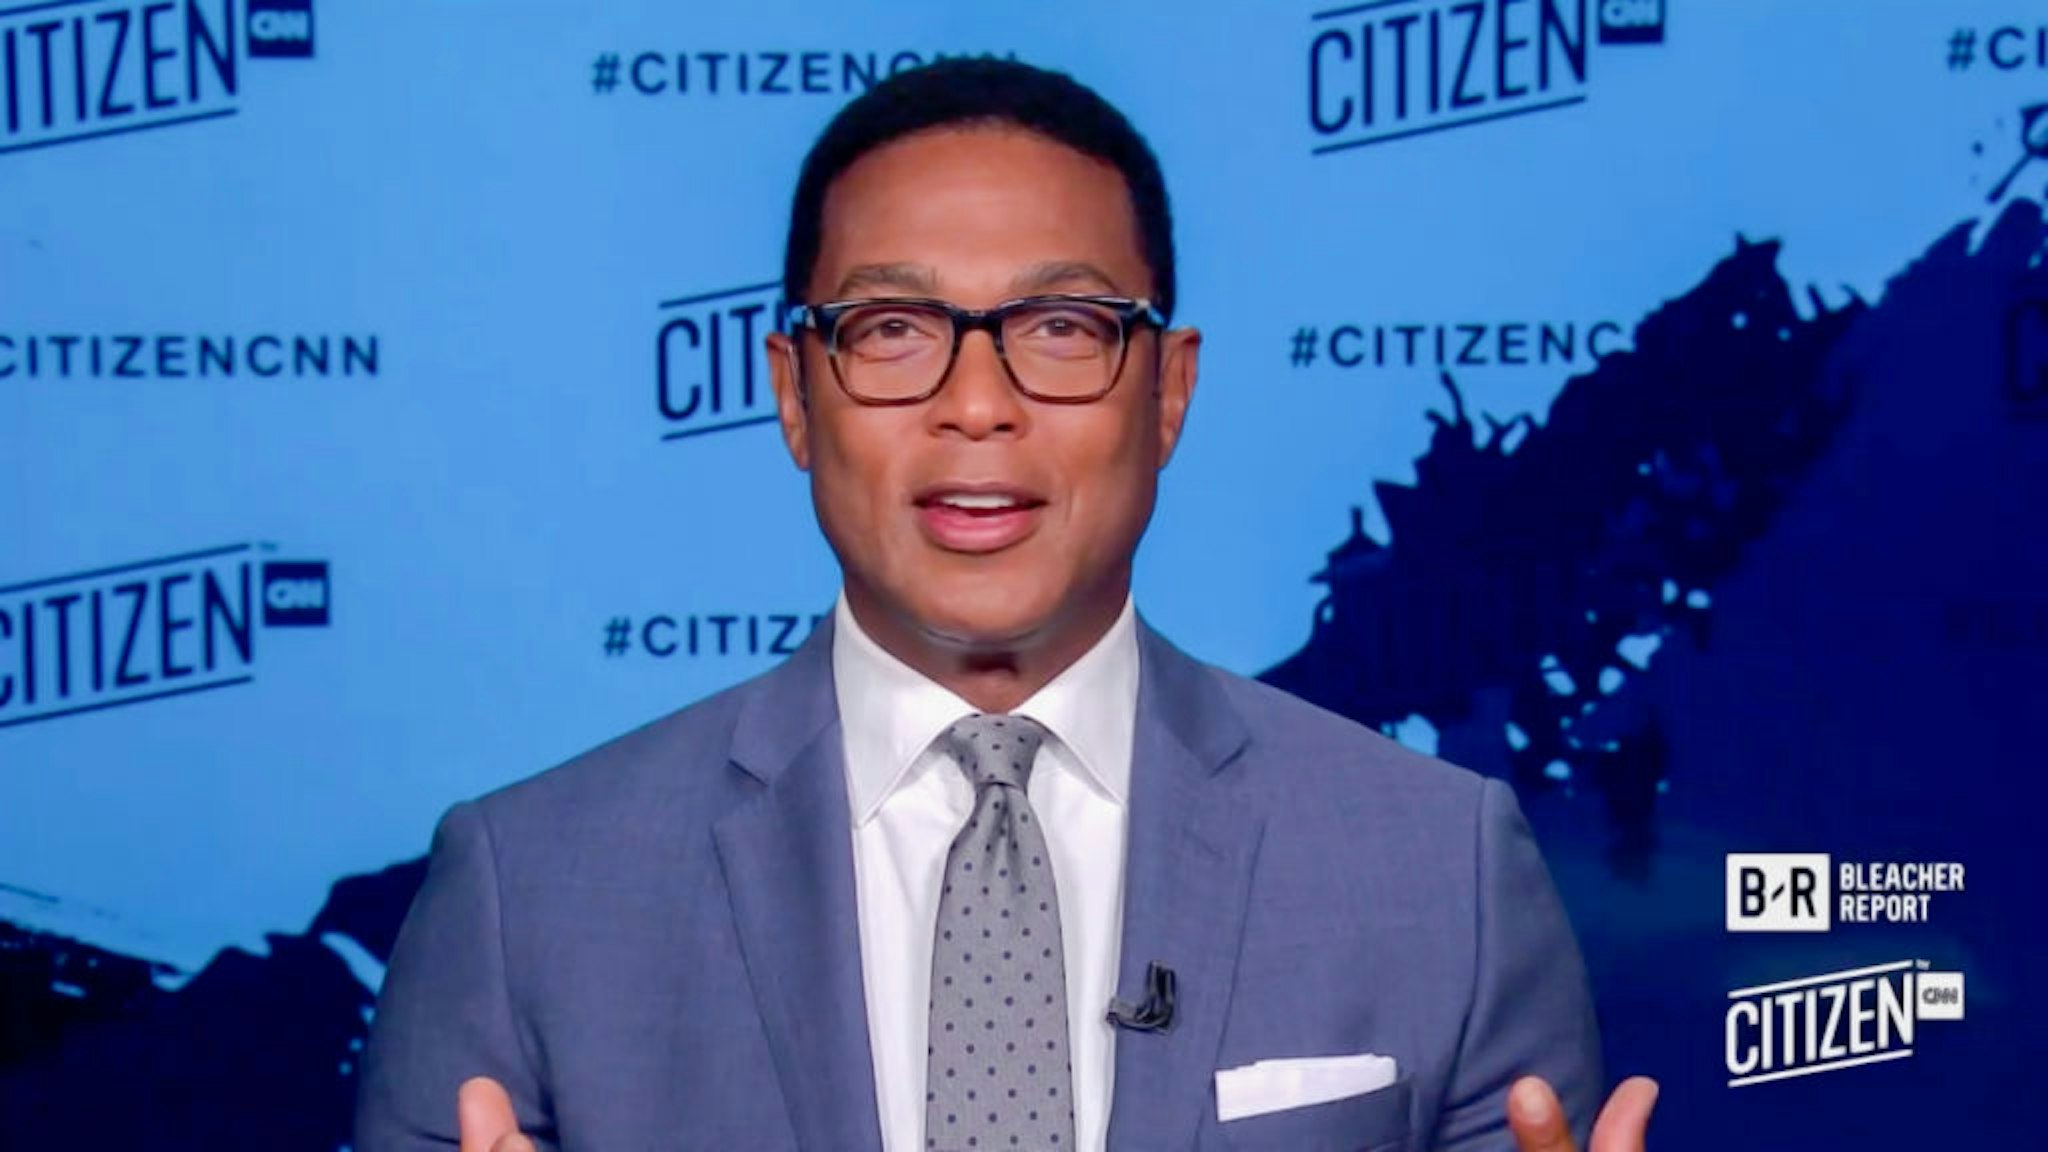 UNSPECIFIED - SEPTEMBER 22: In this screengrab Don Lemon speaks during the CITIZEN by CNN 2020 Conference on September 22, 2020 in UNSPECIFIED, United States. (Photo by Getty Images/Getty Images for CNN)